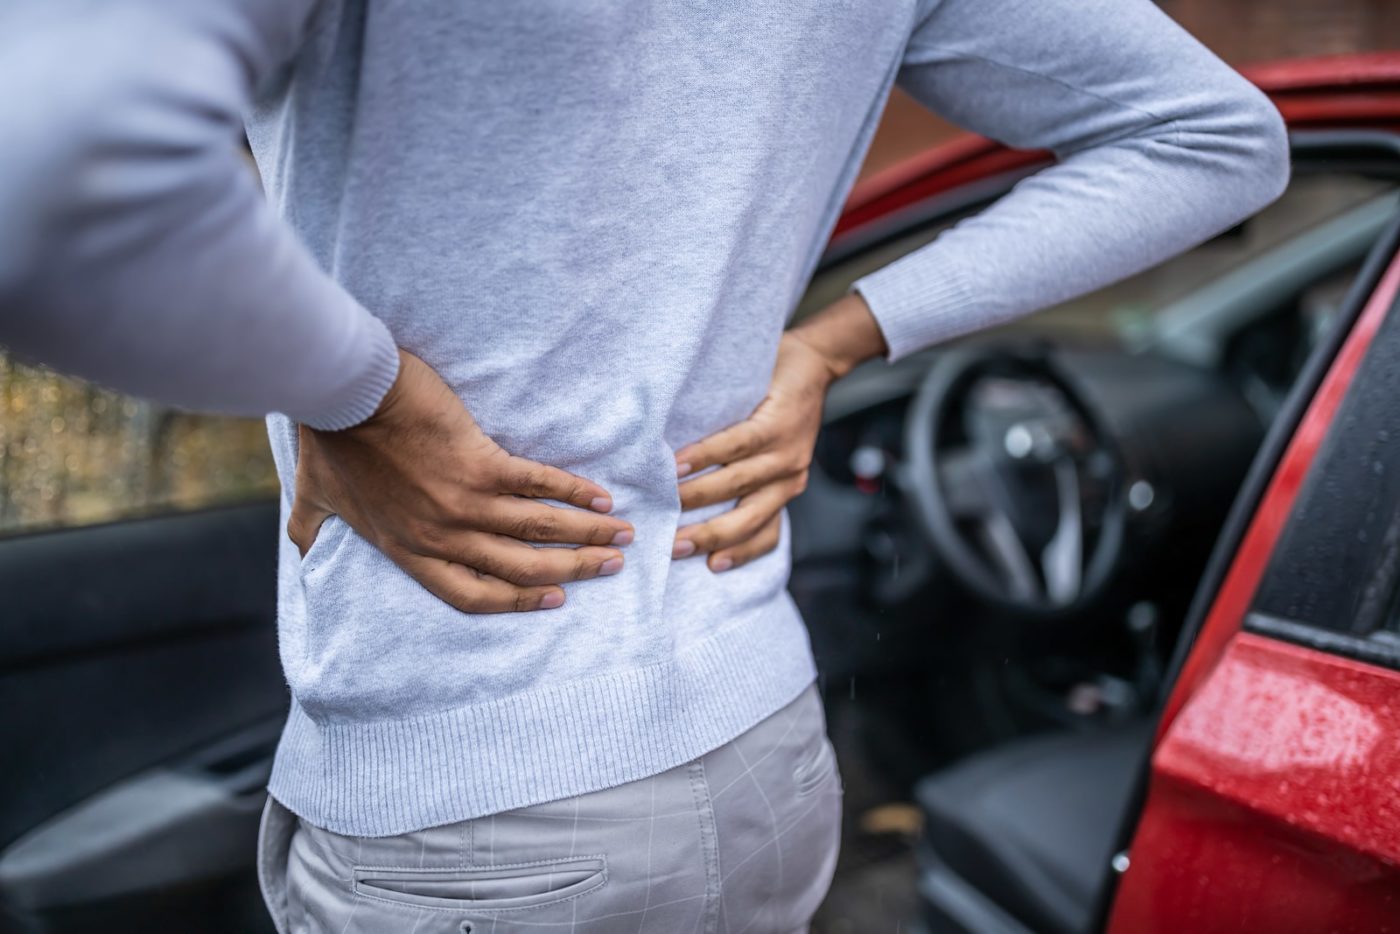 How sore should you be after an accident